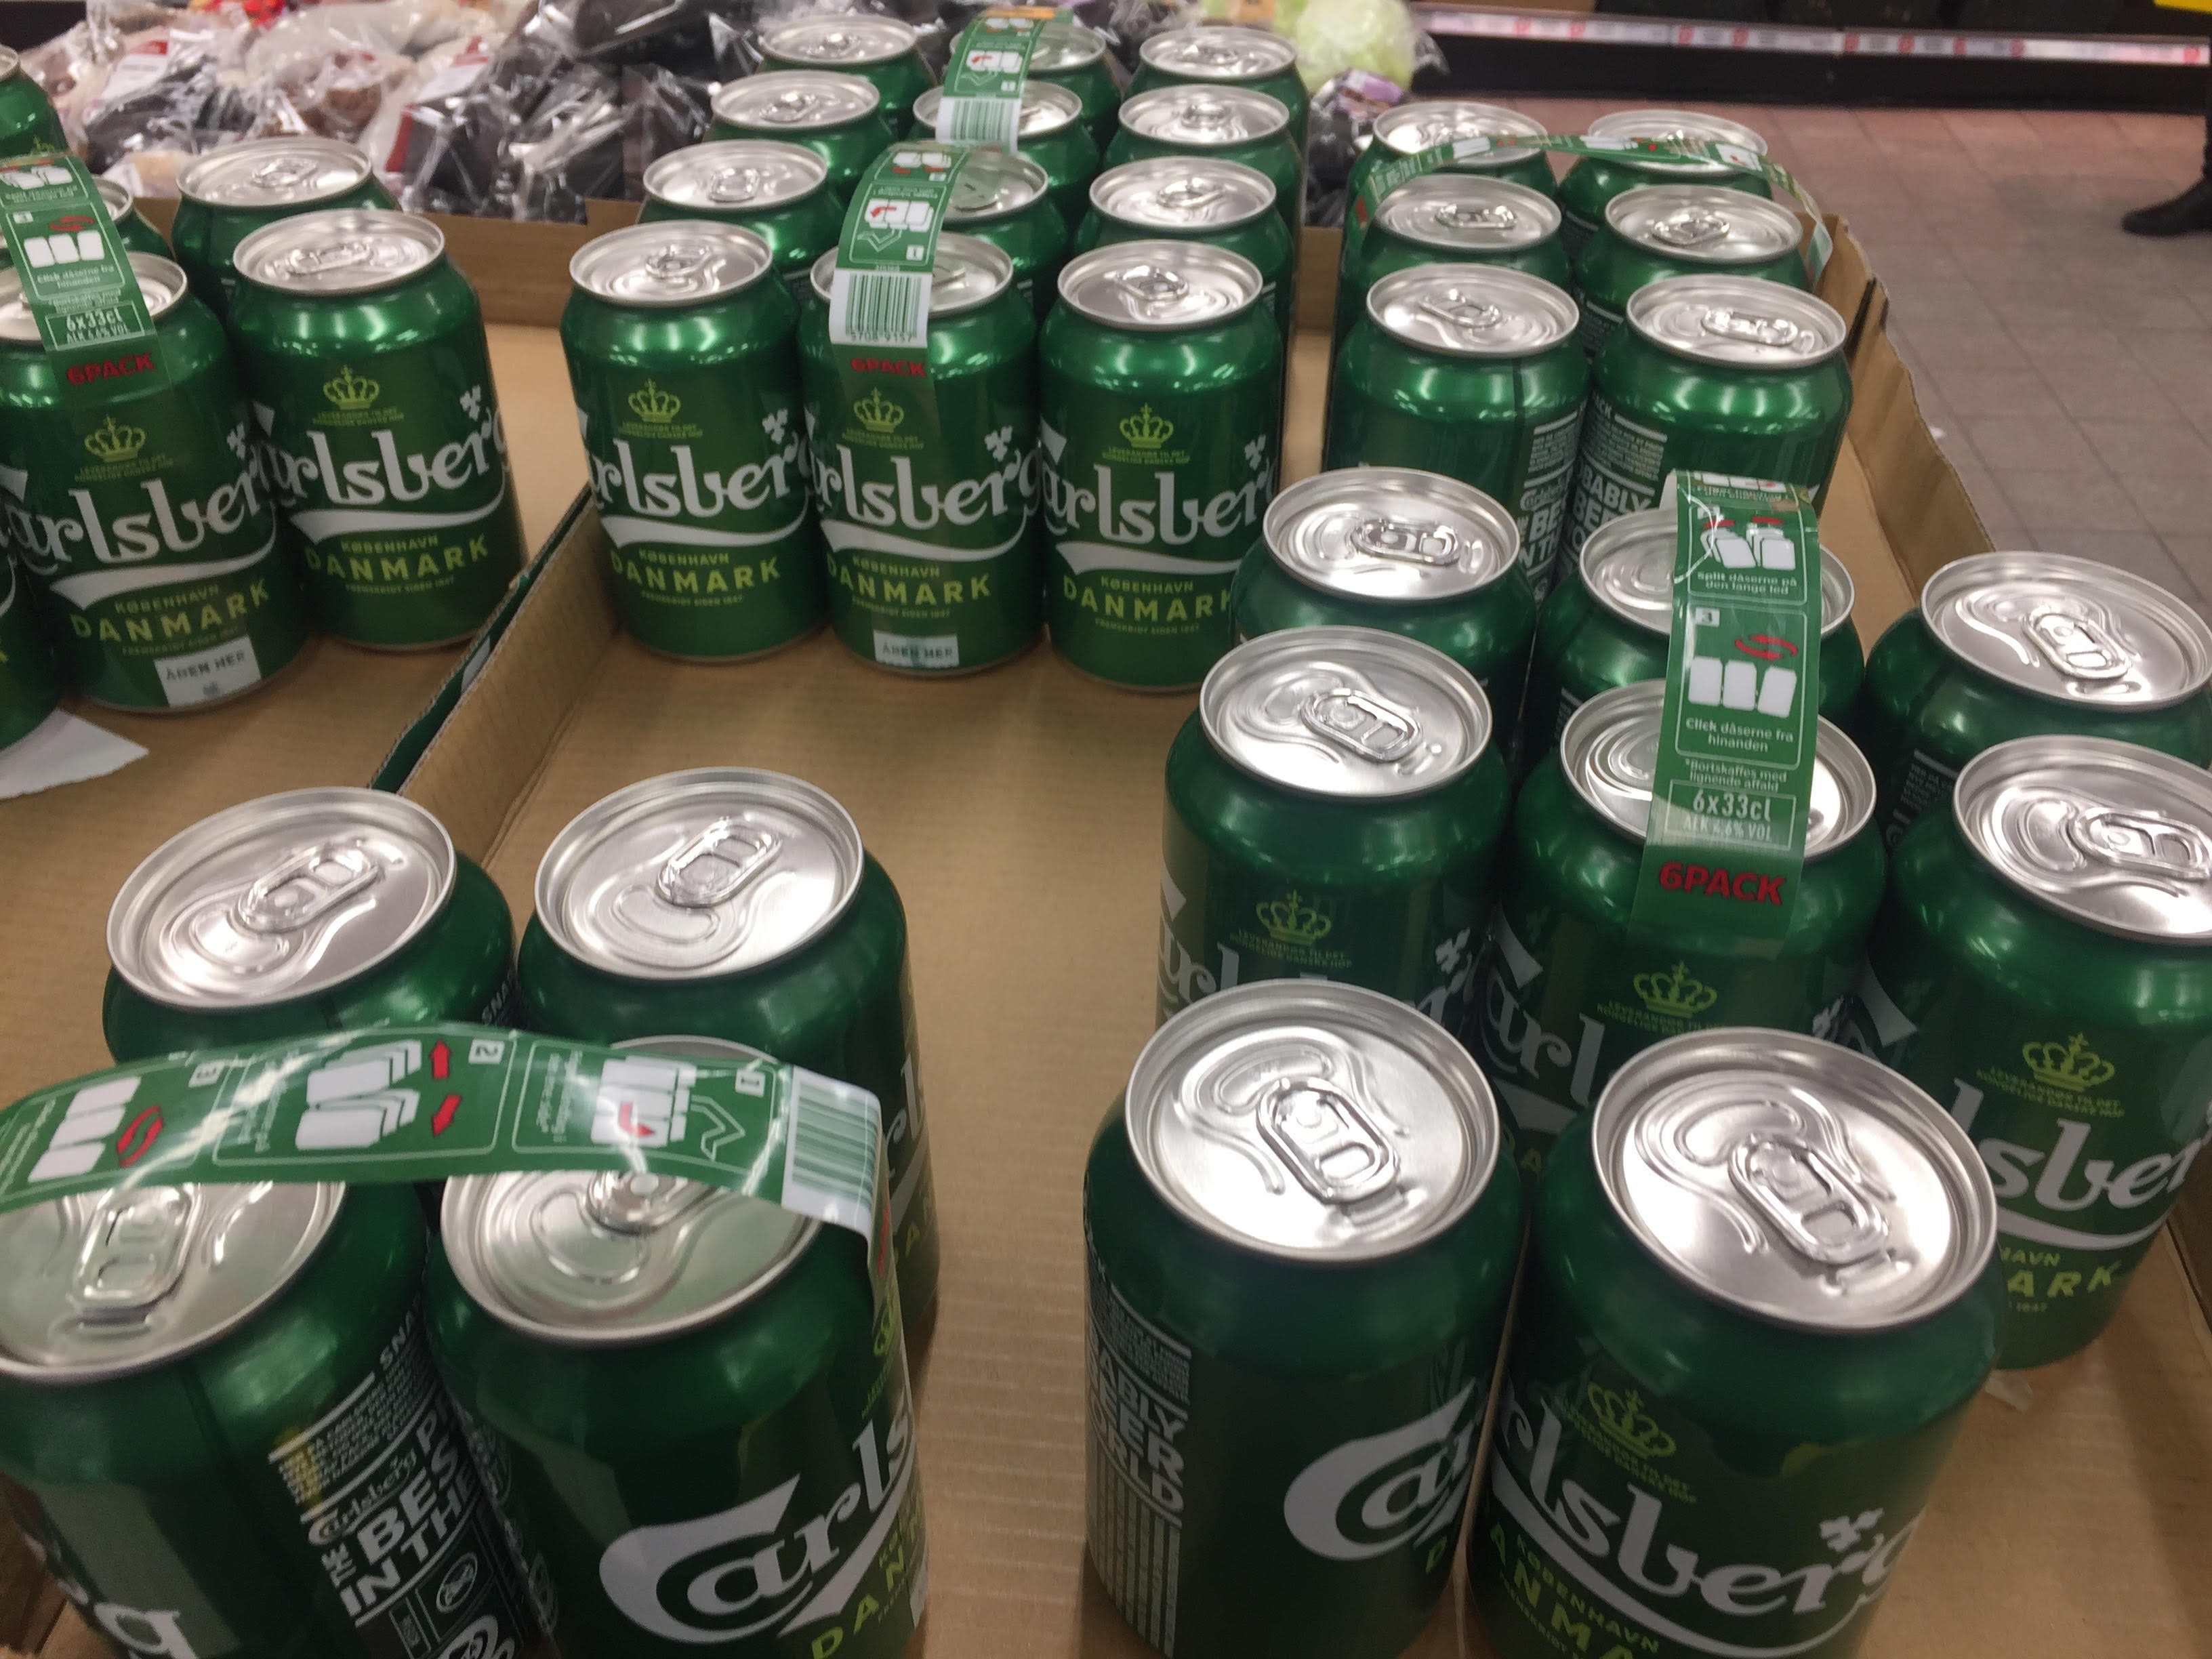 Business News in Brief: Oh snap! Carlsberg’s new sustainable beer packaging hits the streets